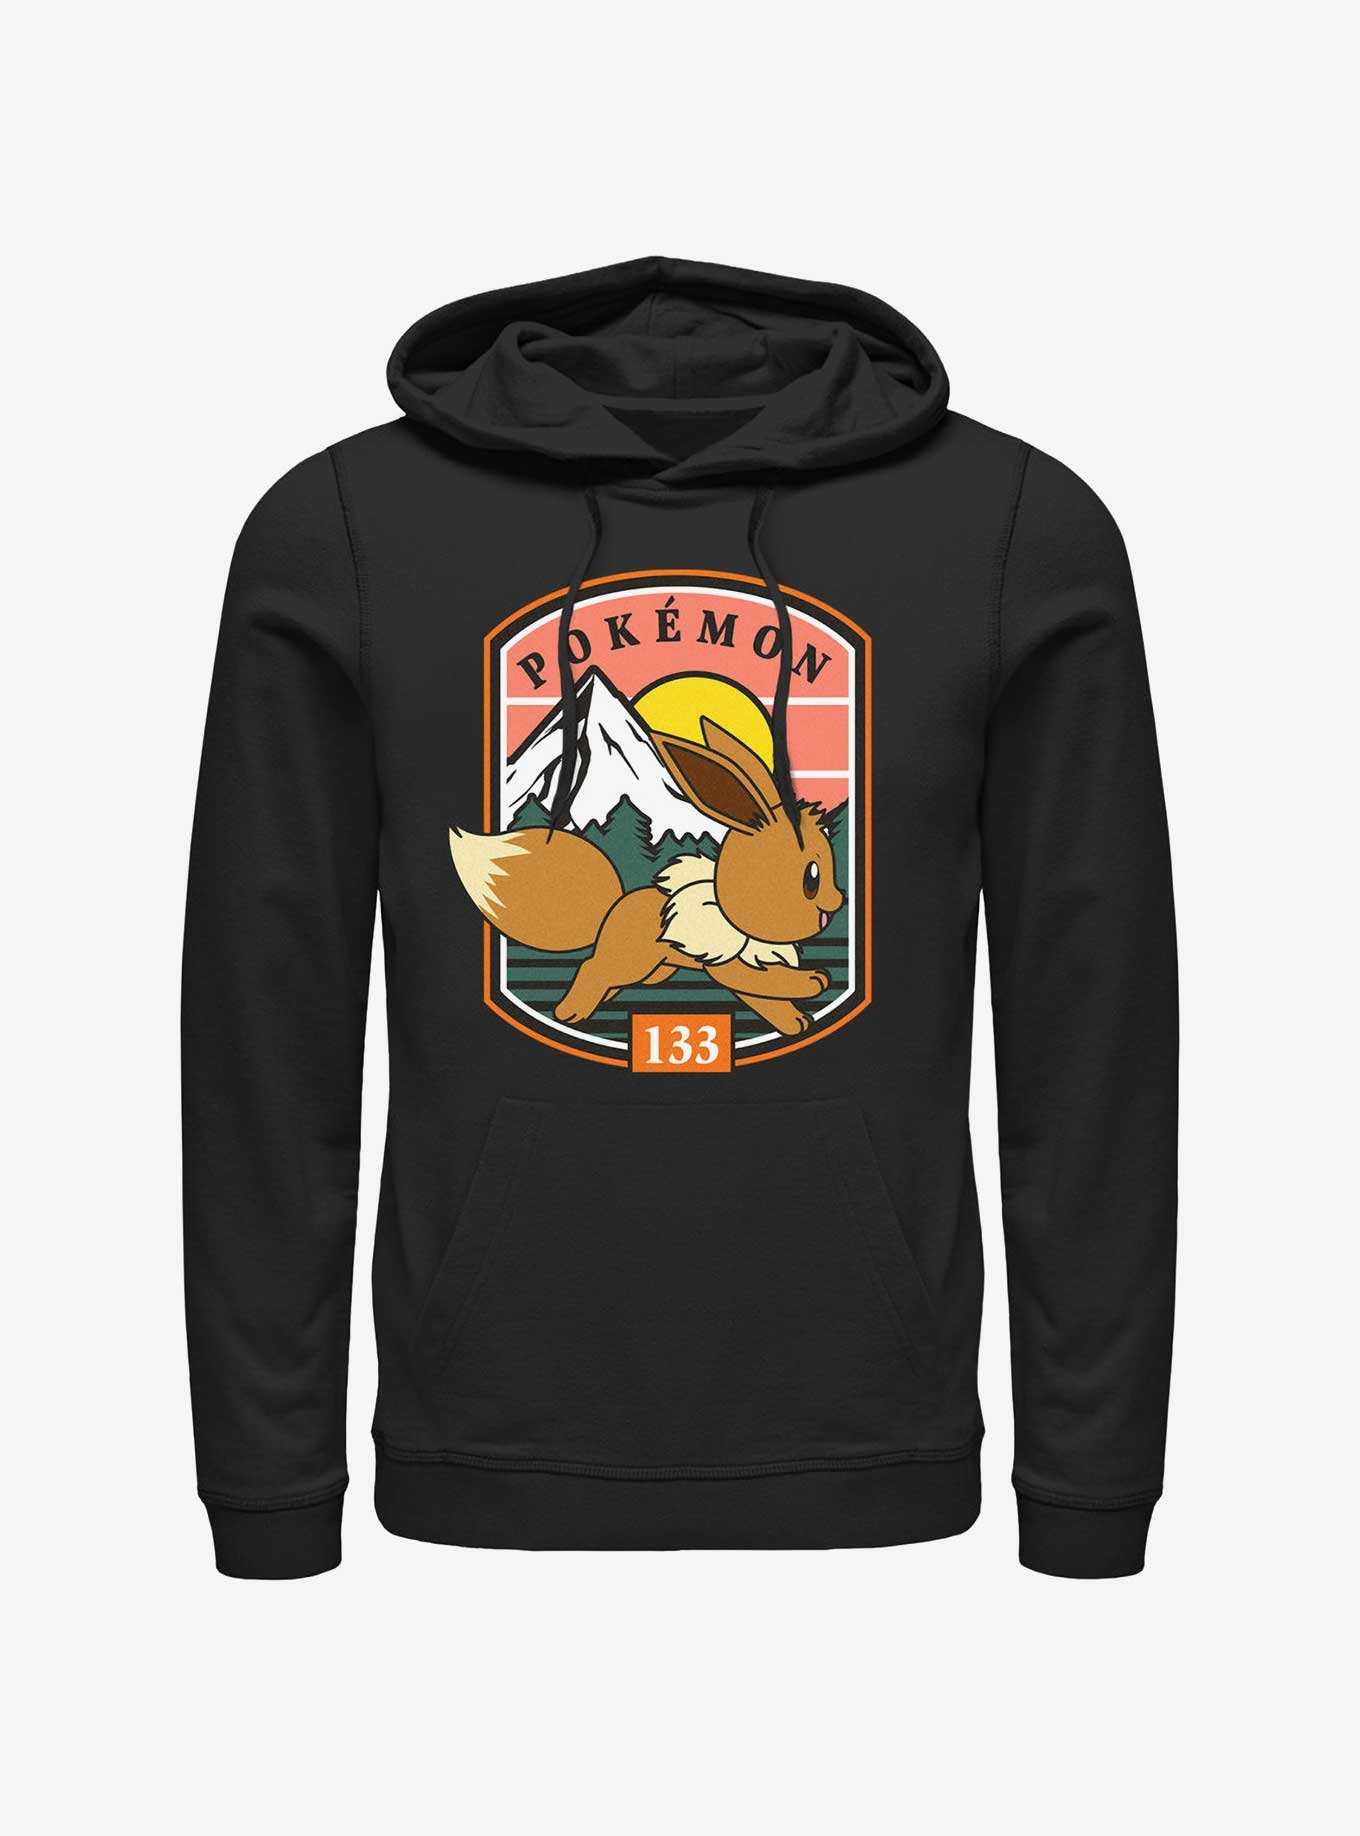 Pokemon Eevee Out For A Run Hoodie, , hi-res